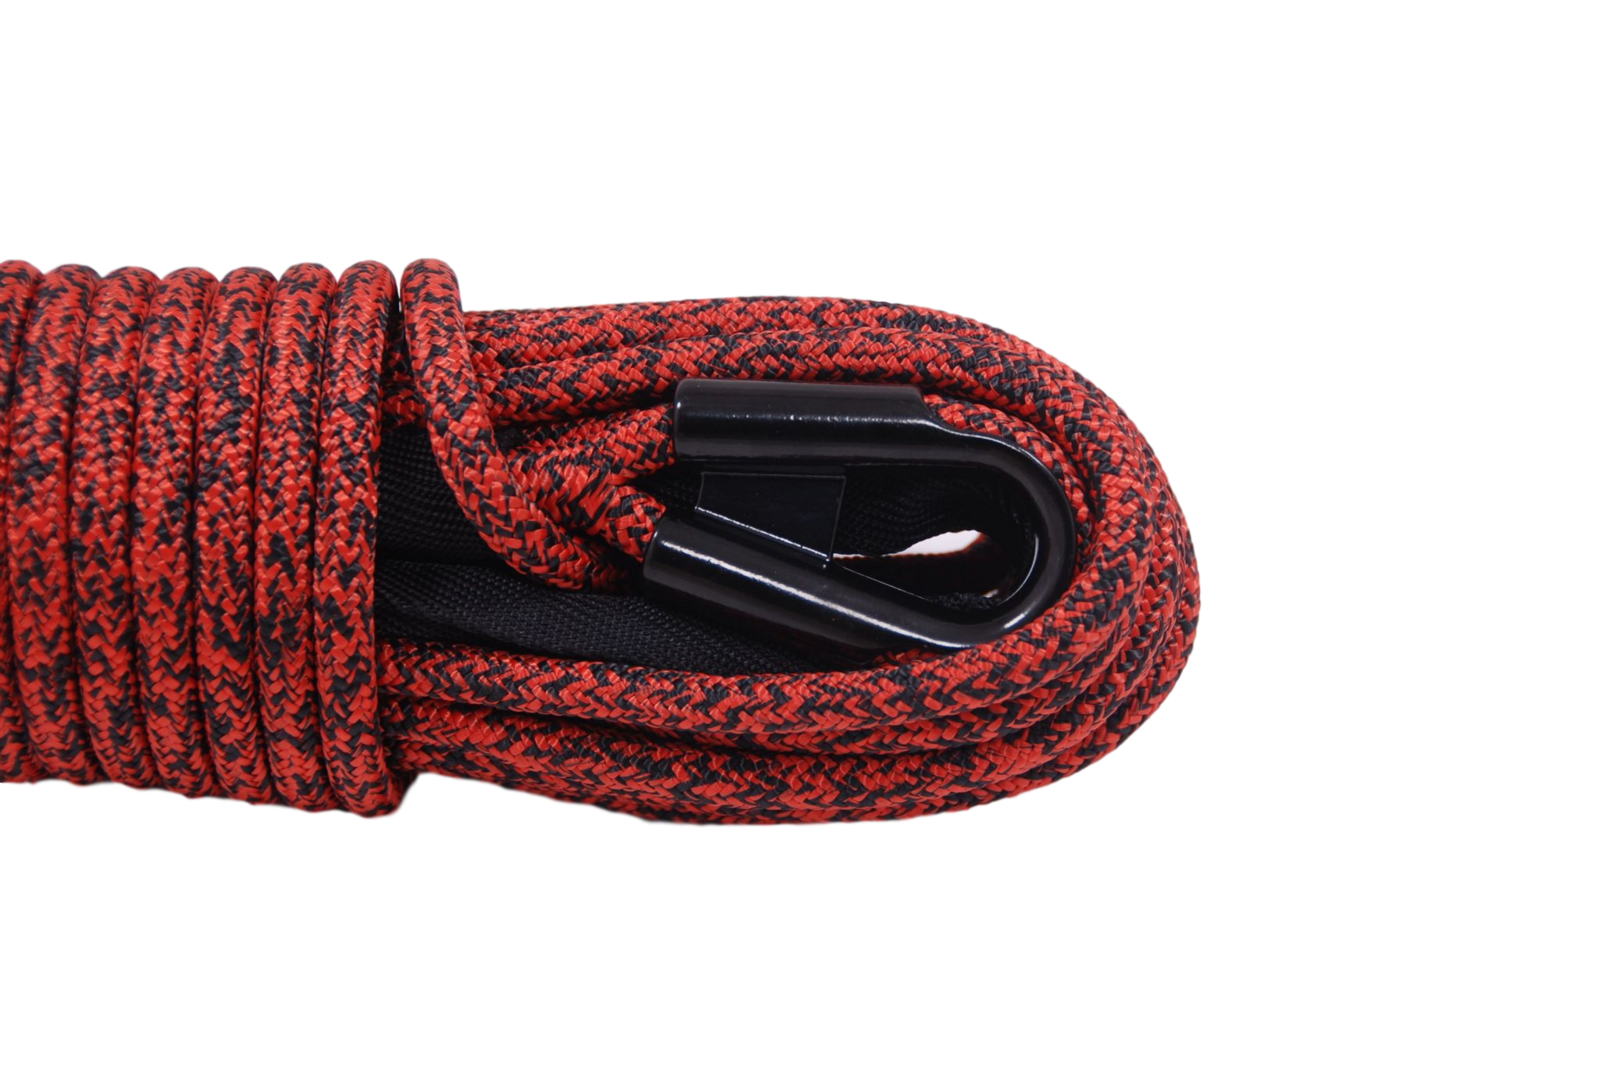 Carbon Offroad Next Gen 24 x 11mm Low mount winch rope kit - Red black mix colour